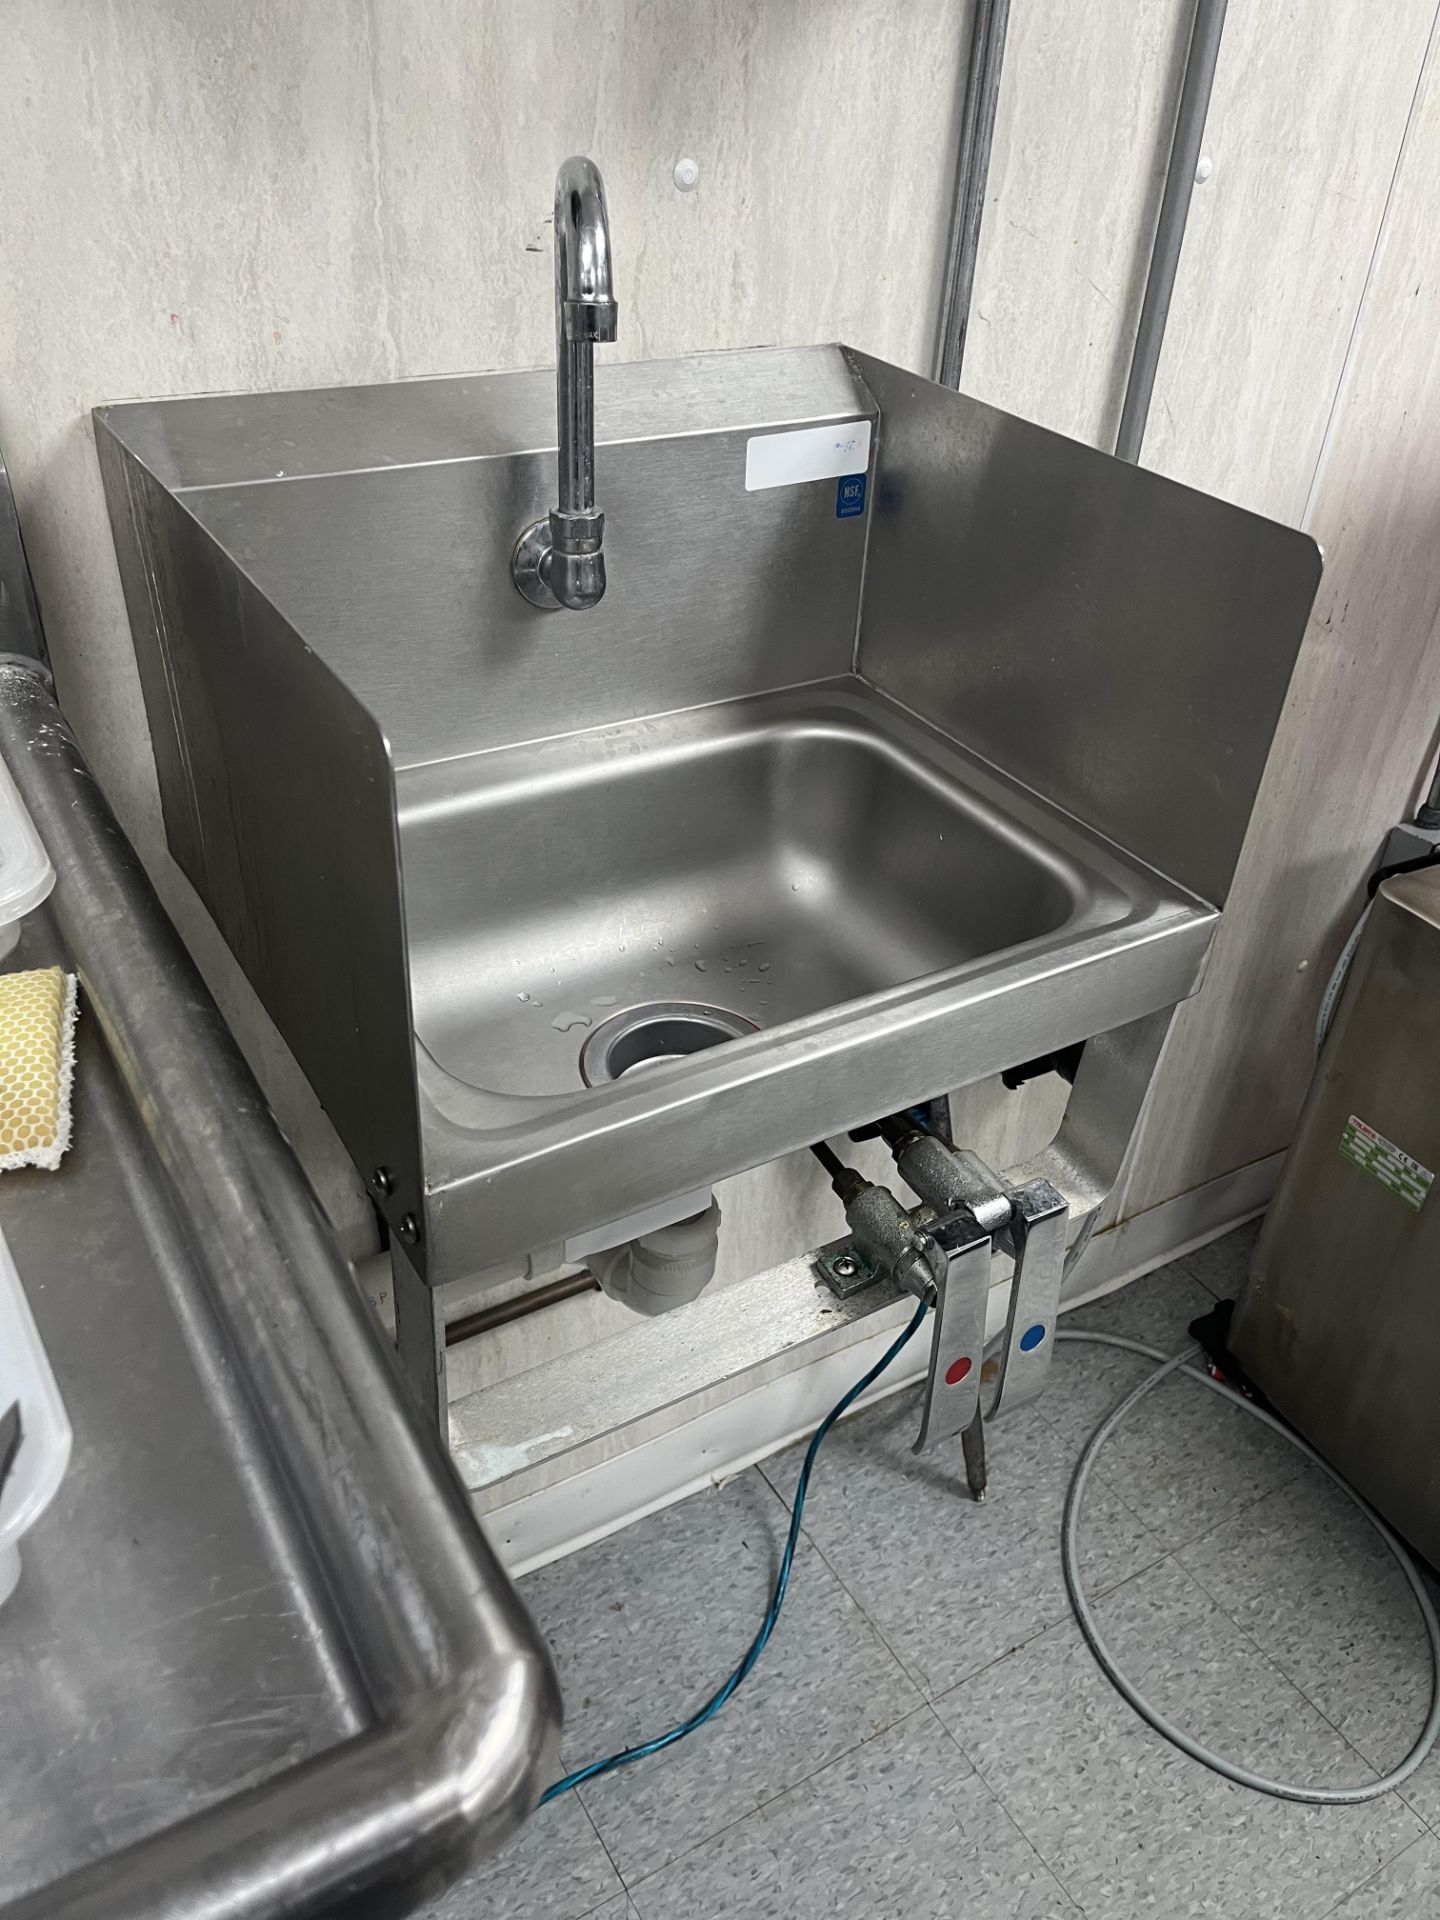 ONE BOWL STAINLESS STEEL SINK MODEL:NSFD032054 DIMS APPROX 48" L 29" W 40" H - Bild 2 aus 2